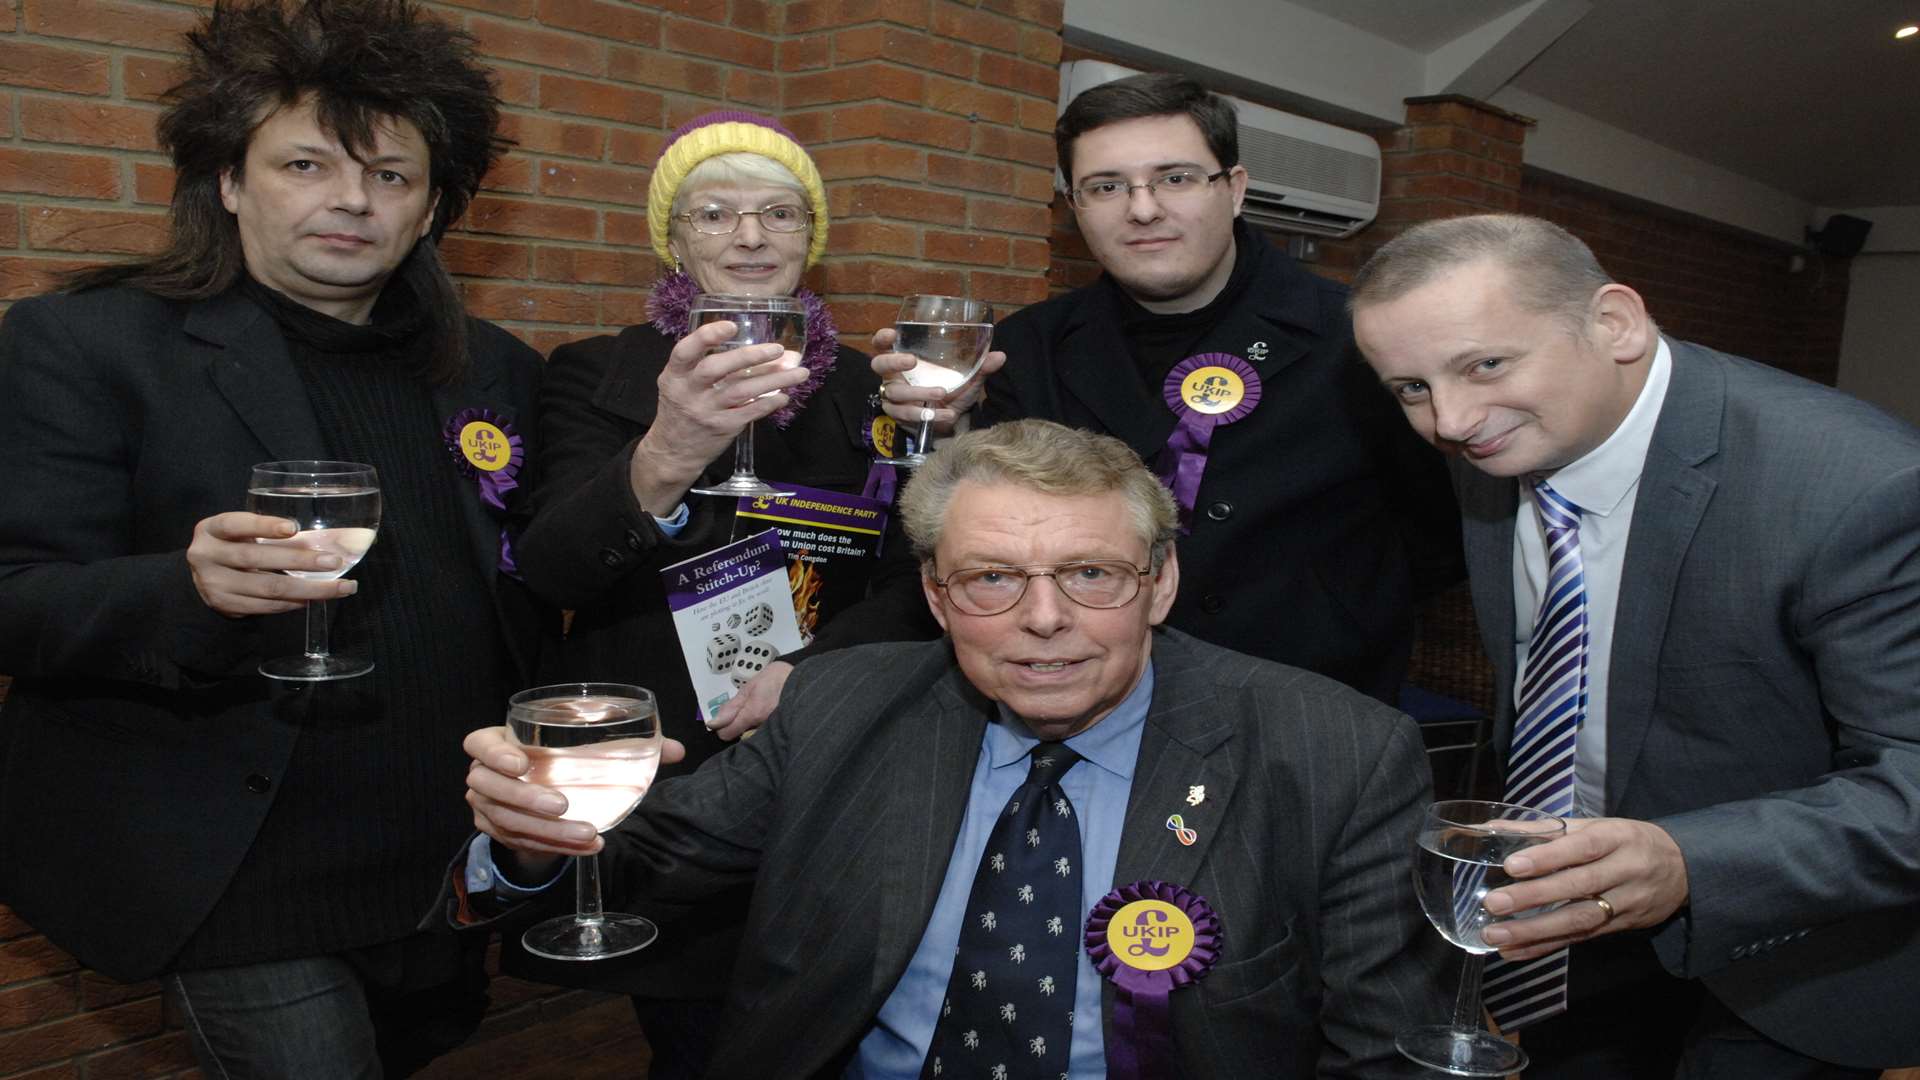 Adrian Crowther celebrates his defection to Ukip with other members, including Cllr Mike Baldock, chairman Mo Elenor, Cllr Lee Burgess and south east spokesman Ray Finch. Picture: Chris Davey